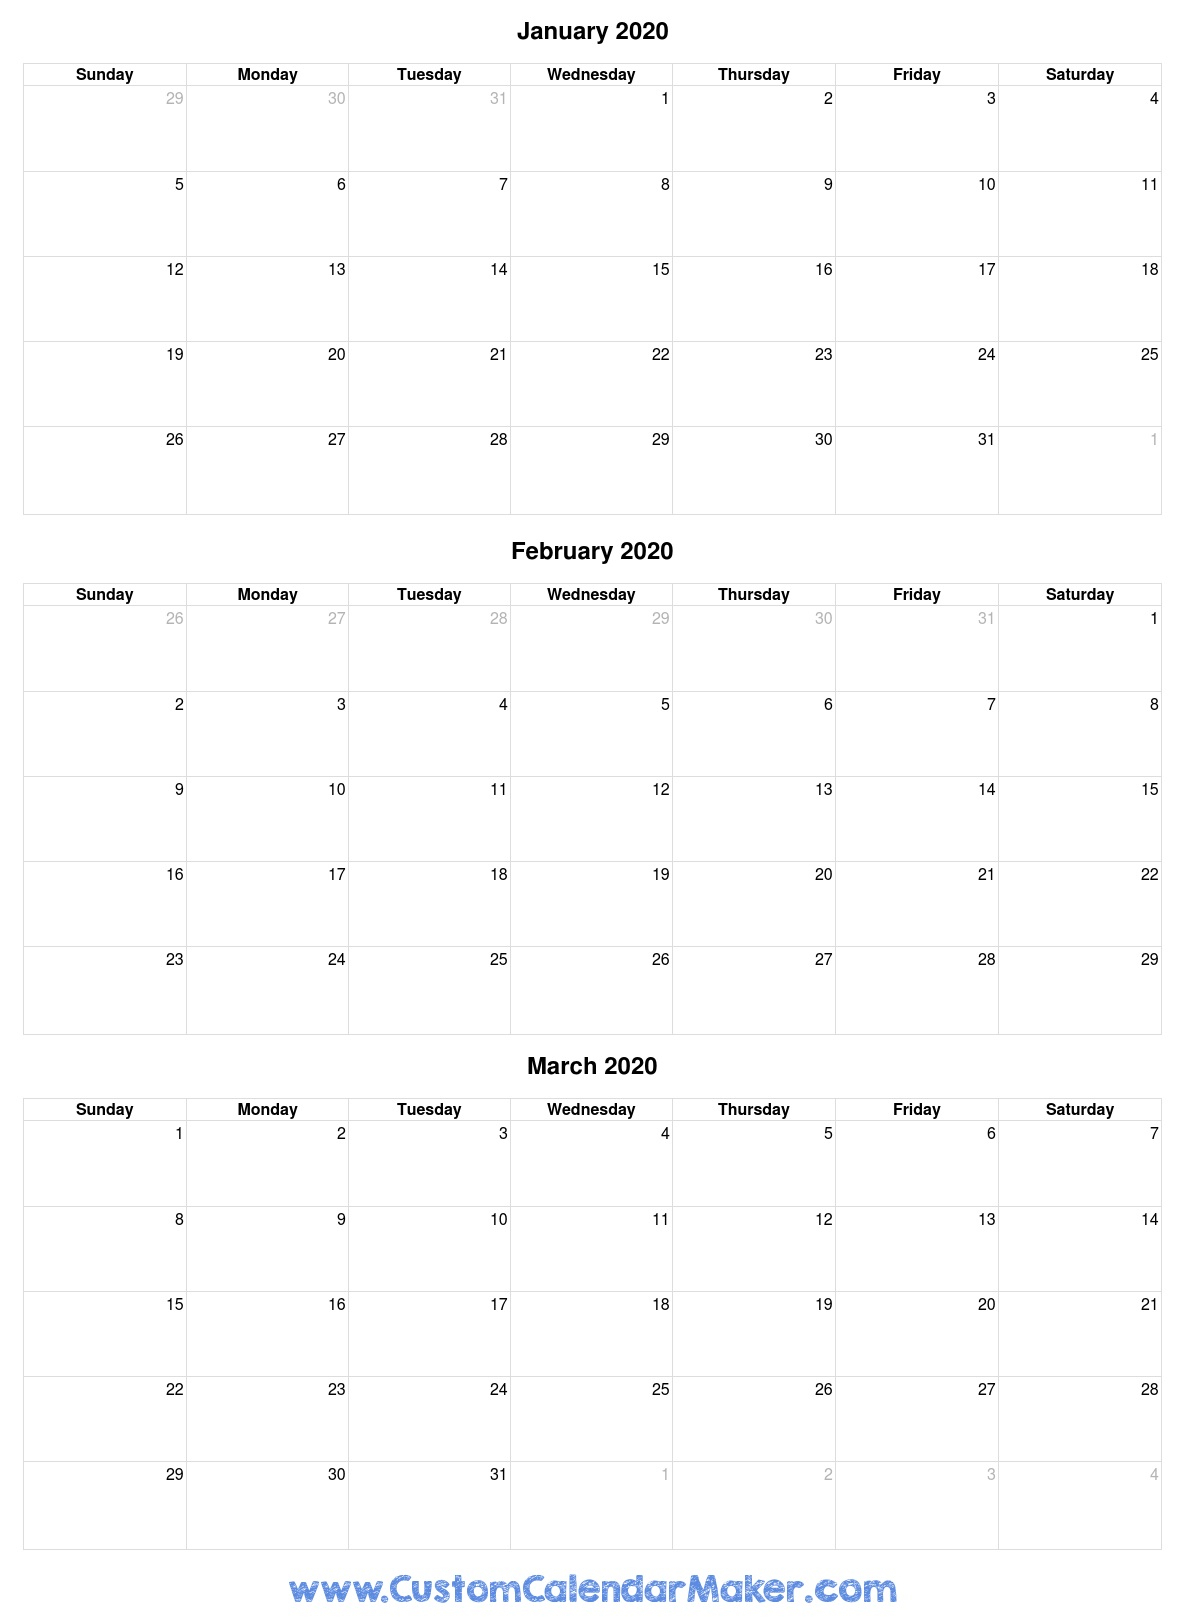 January To March 2020 Calendar